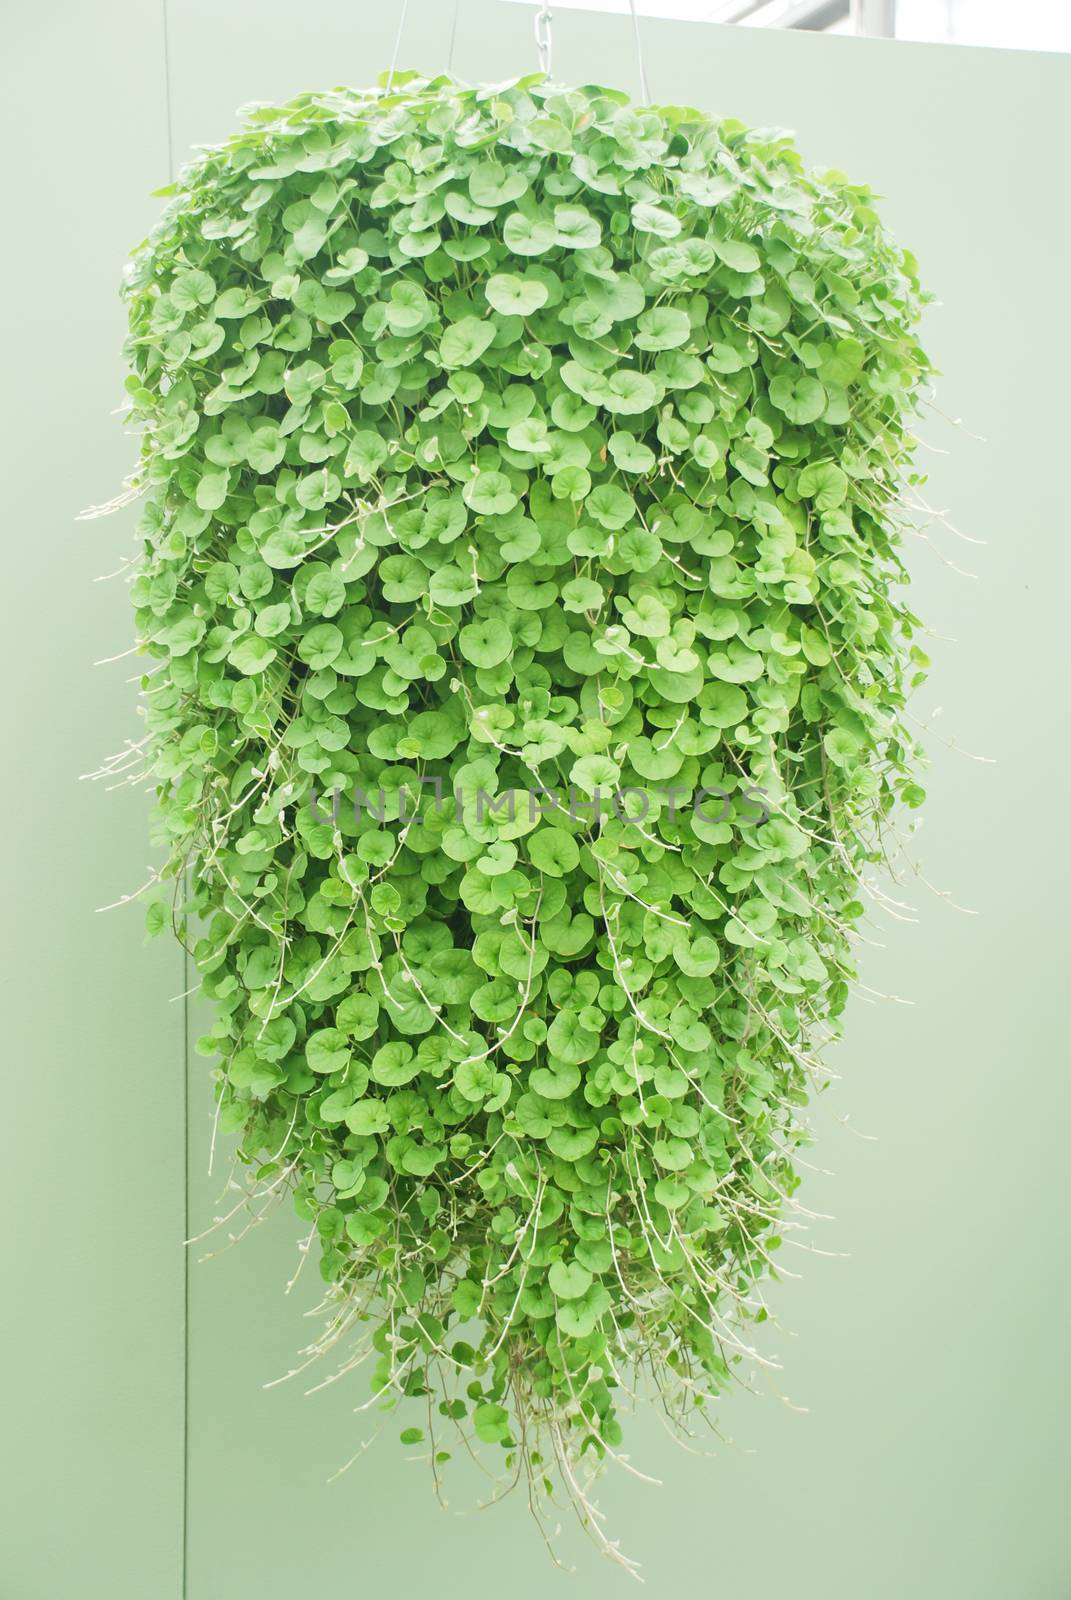 Dichondra Repens plant is grown at the nursery, hanging plants